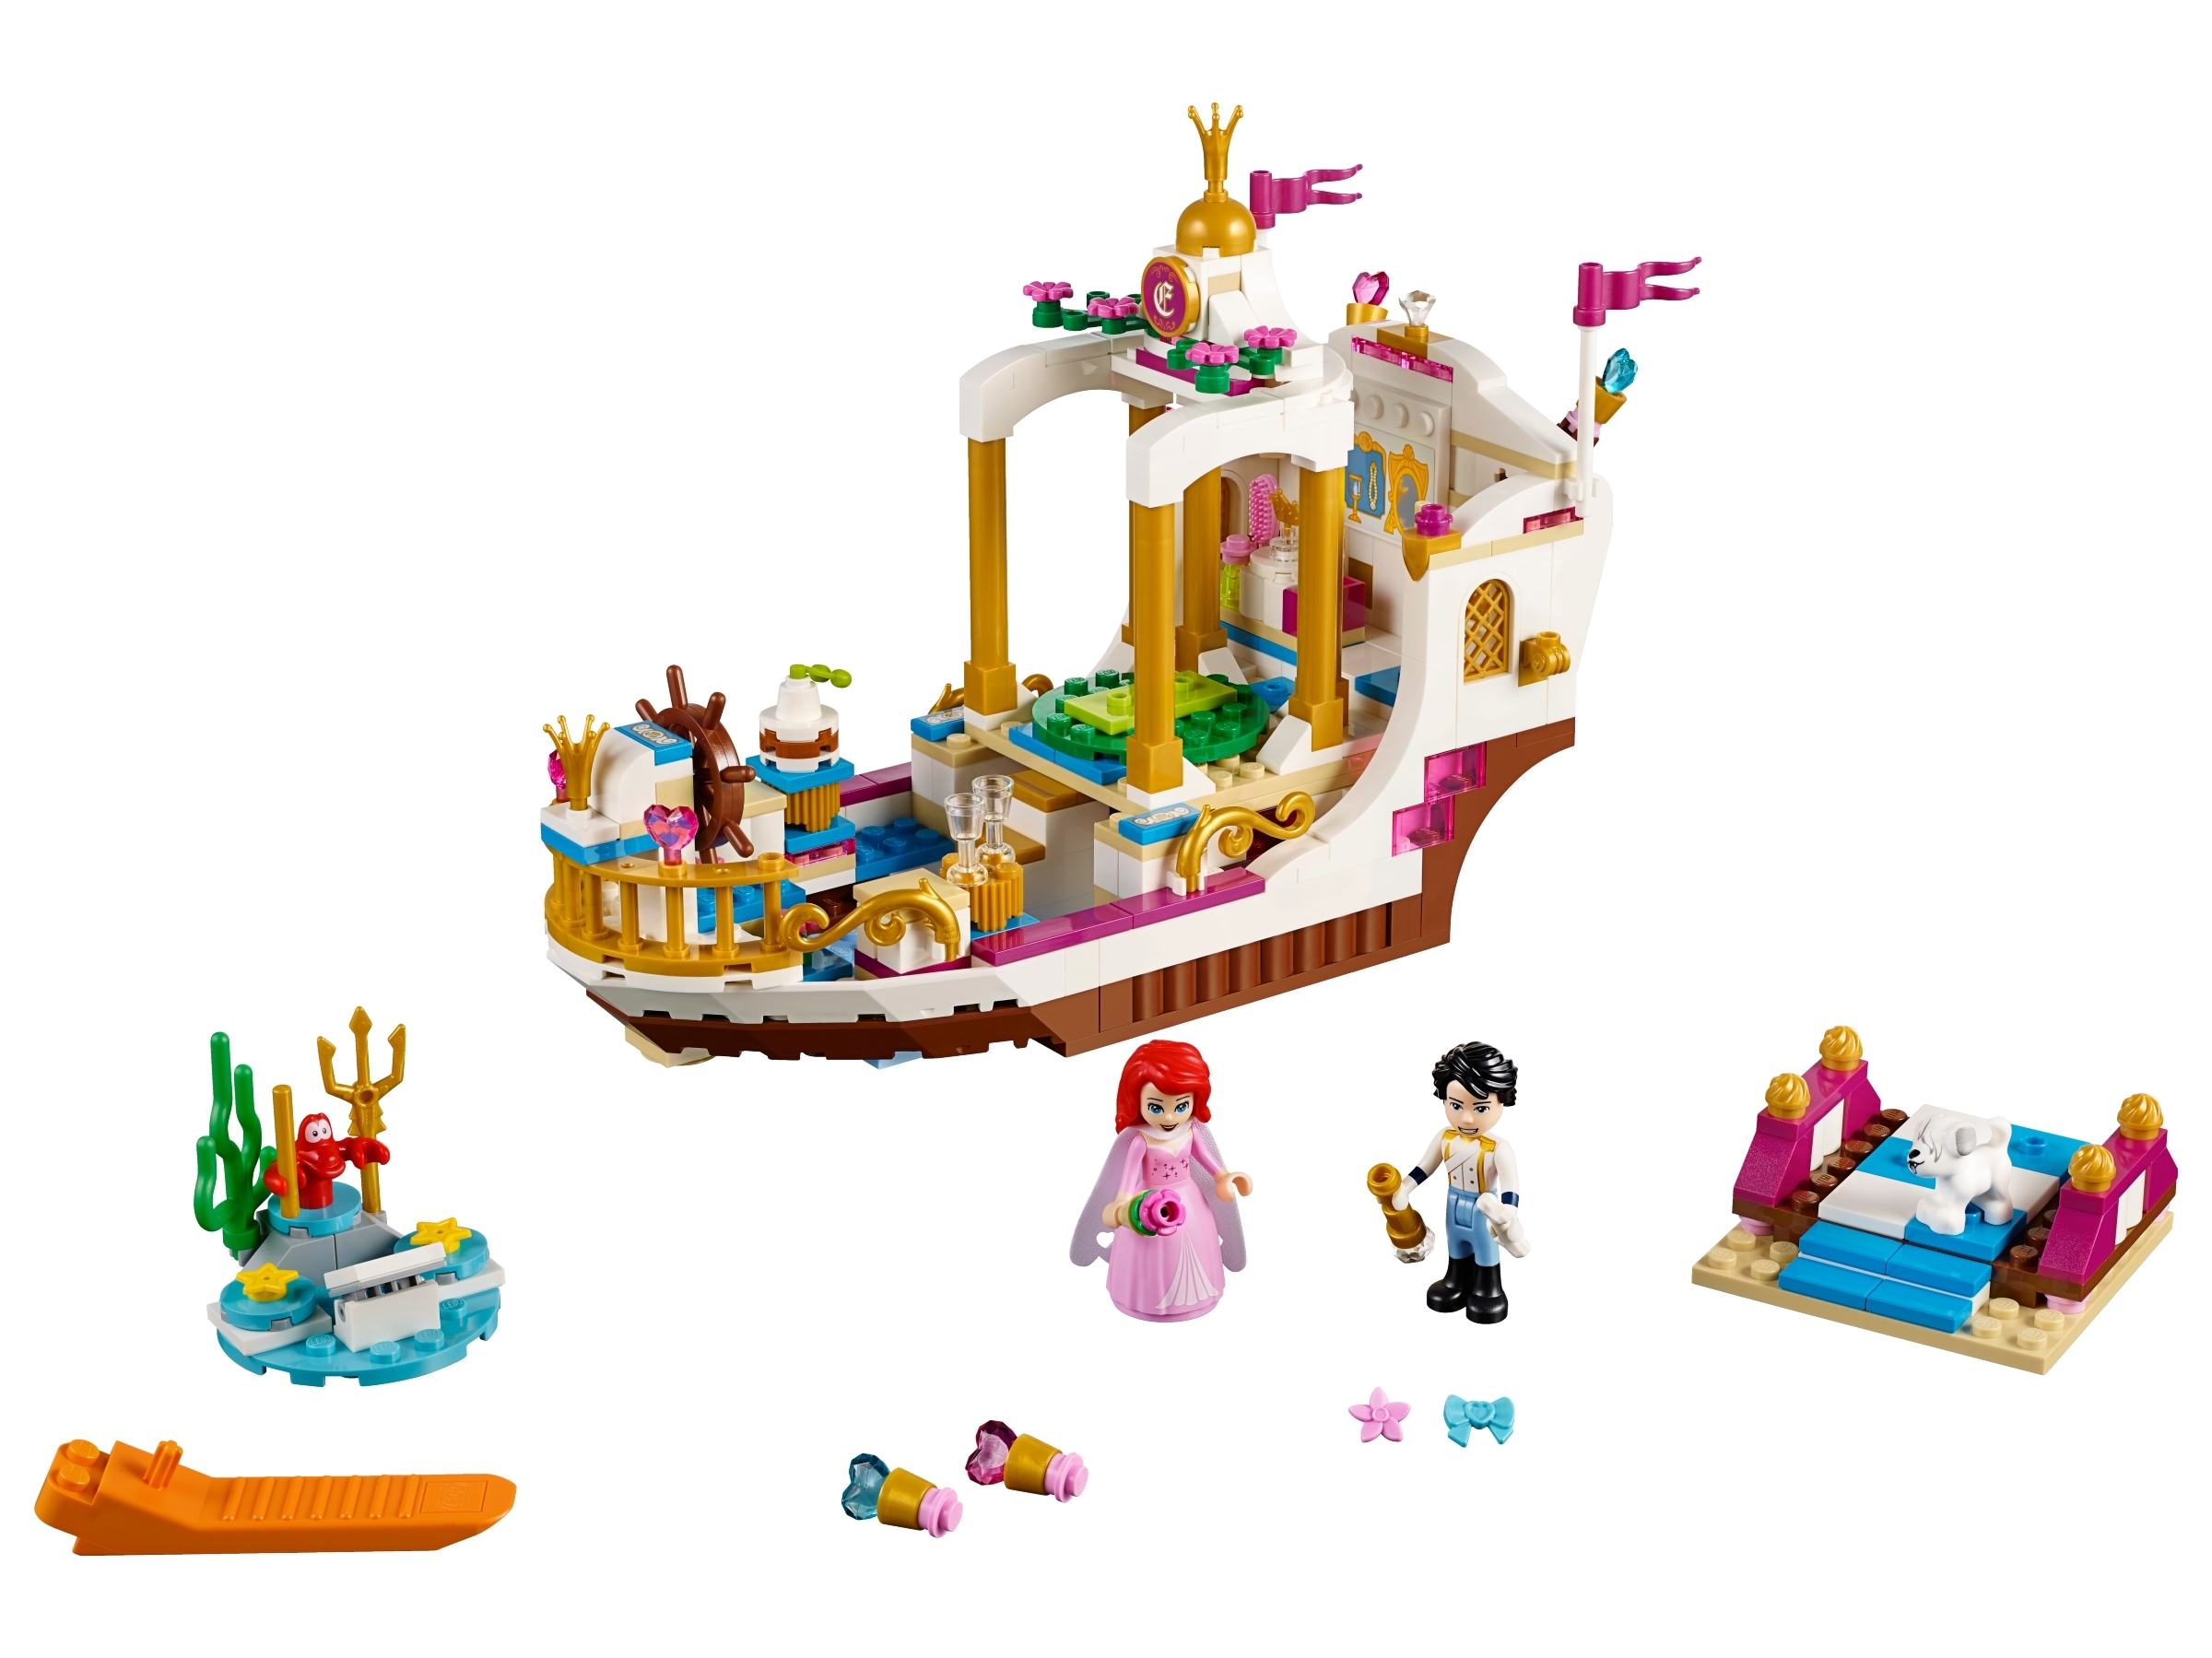 Ariel's Royal Celebration Boat 41153 | Buy online at the Official US